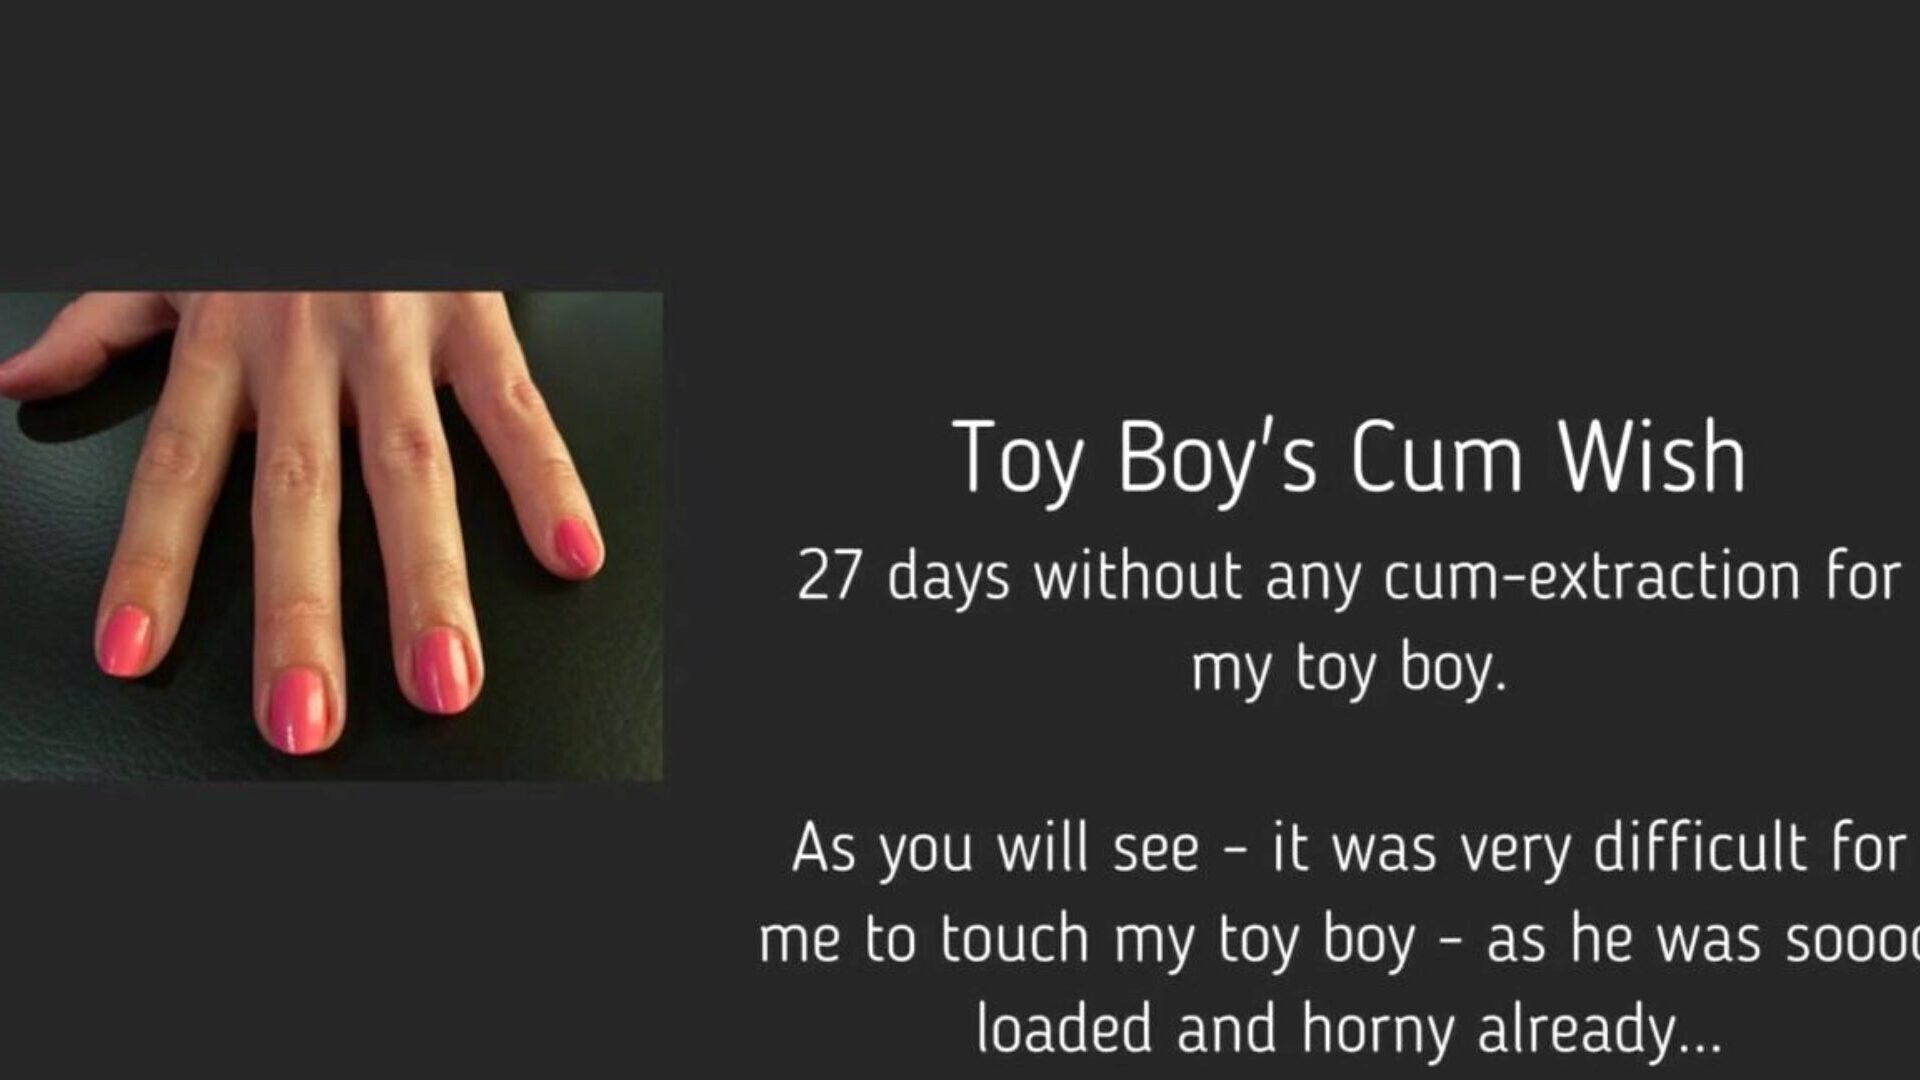 Toy Boy’s Cum Wish: Free Femdom Handjob HD Porn Video 95 Watch Toy Boy’s Cum Wish tube orgy movie for free on xHamster, with the sexiest bevy of Femdom Handjob Bel Ami Cum & Tube Boy HD porno movie scene gigs